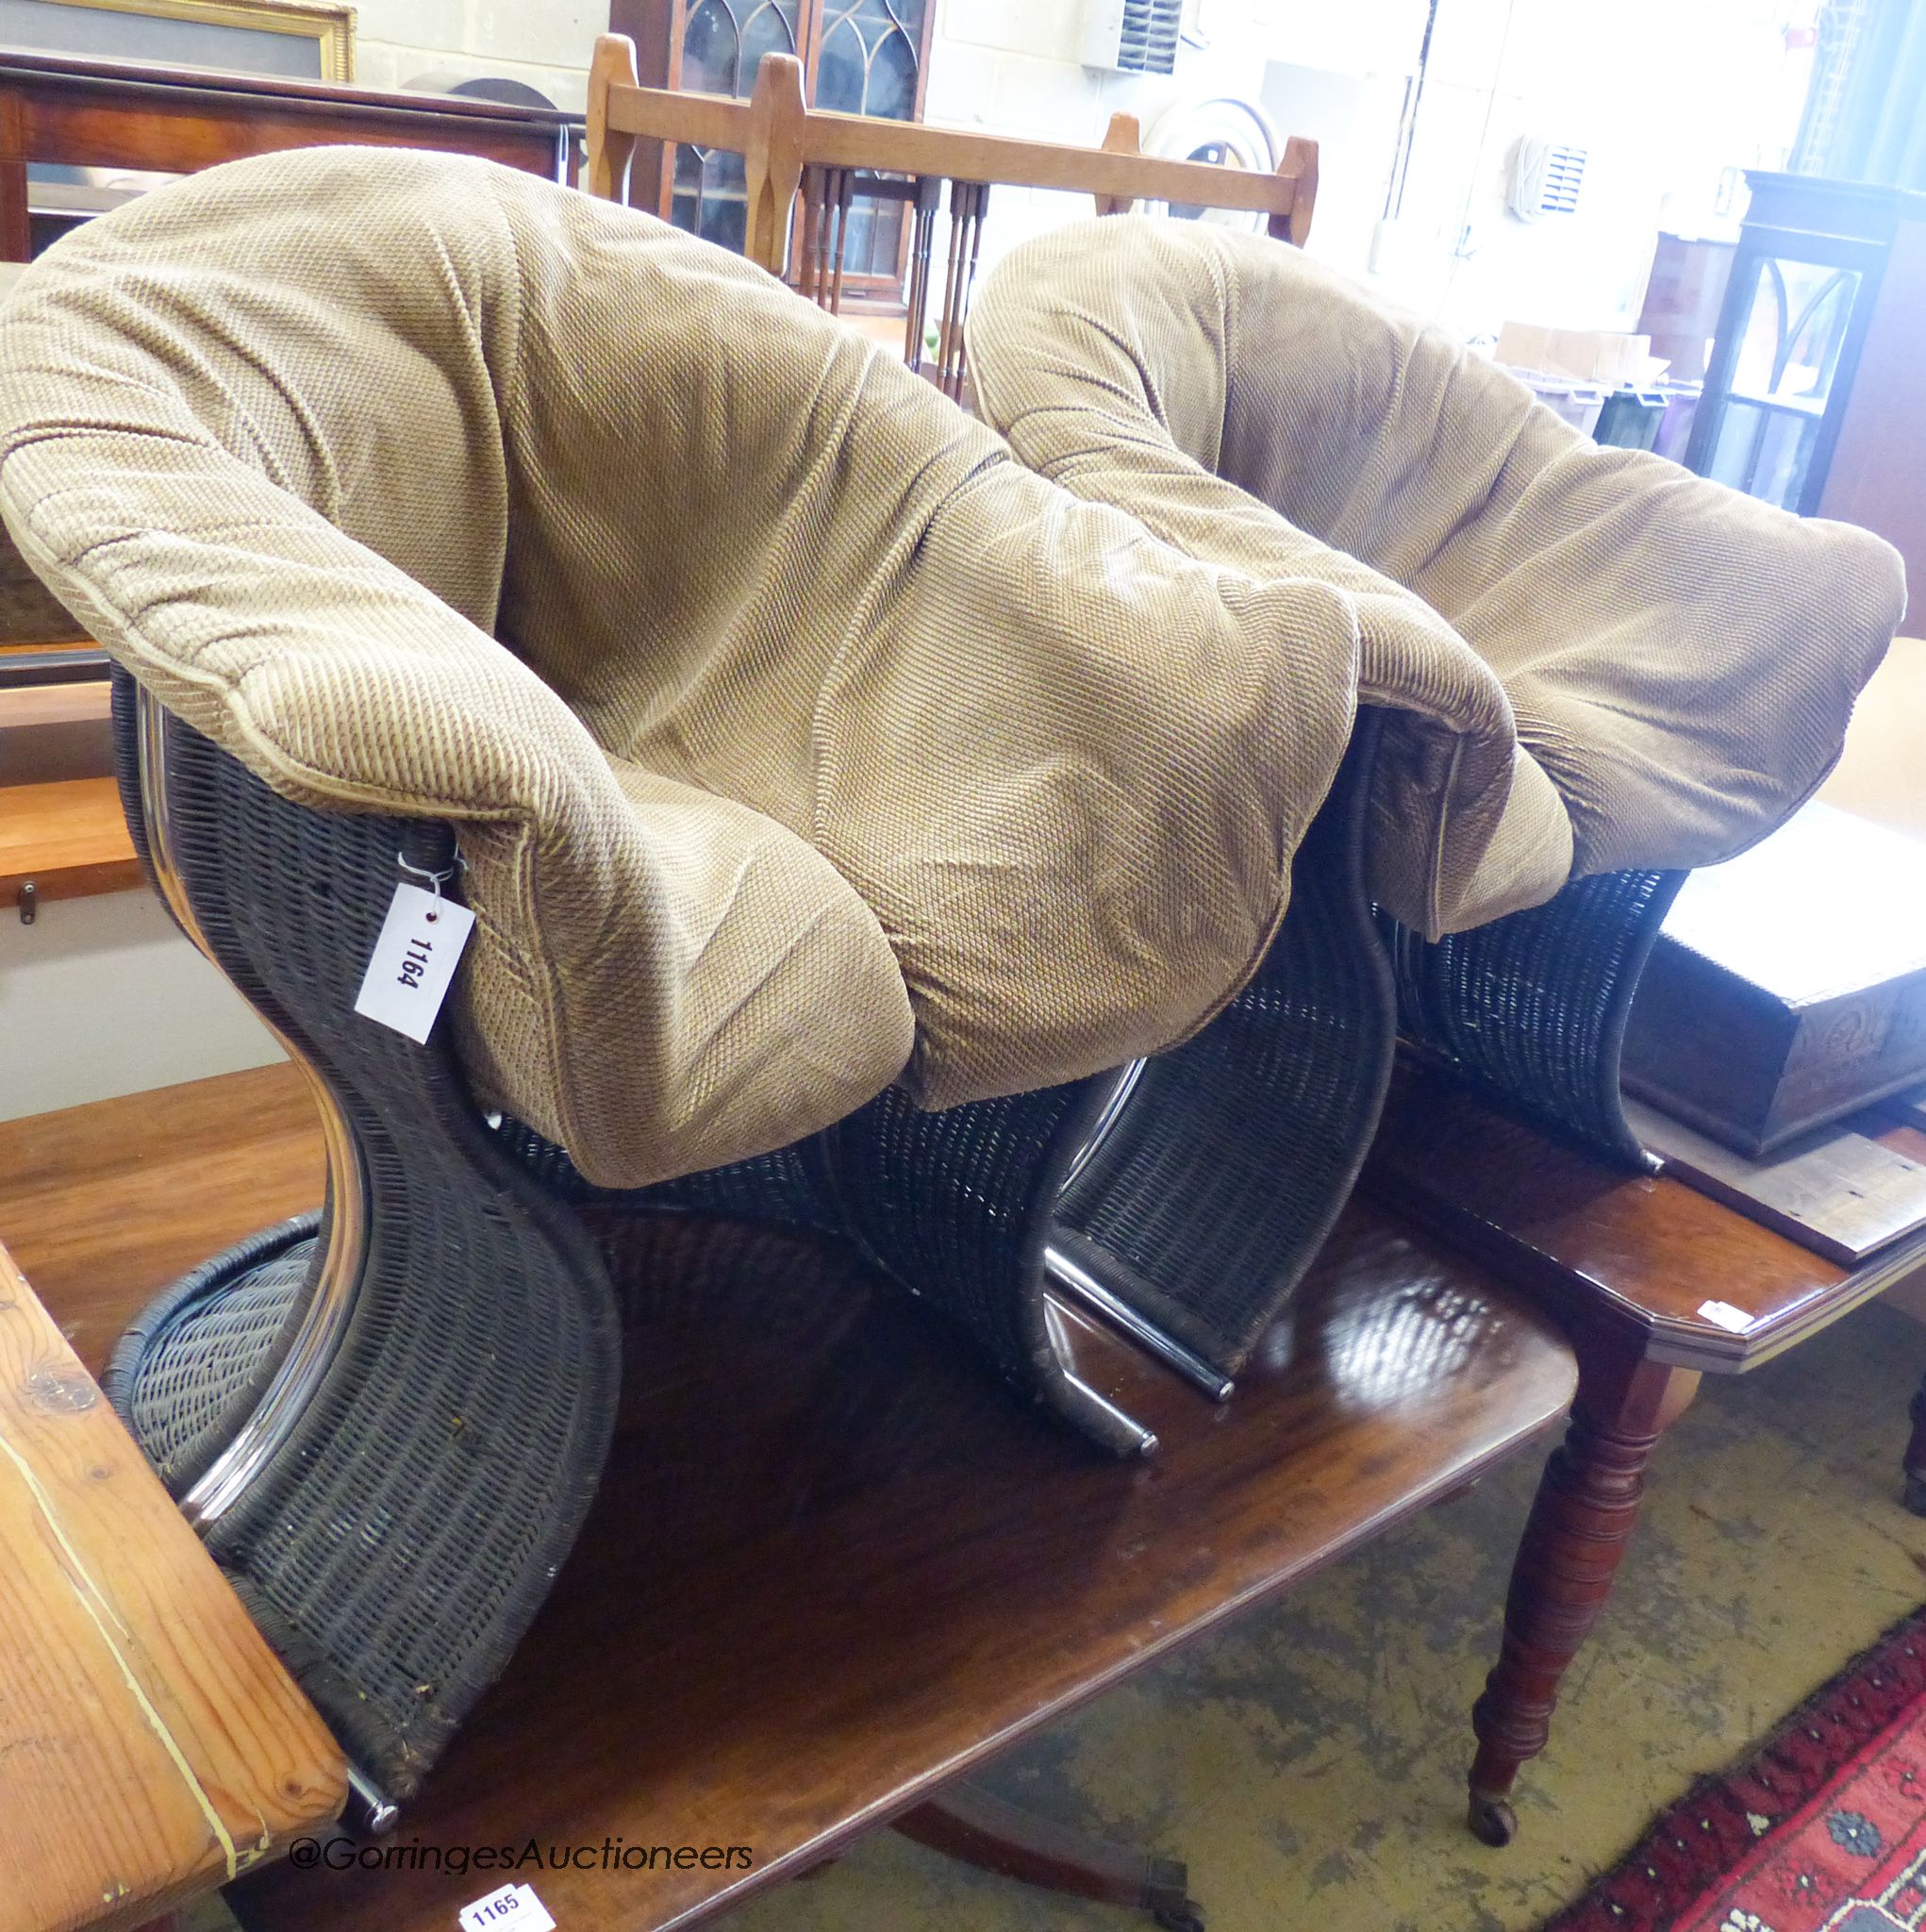 A pair of Pieff cane chairs.